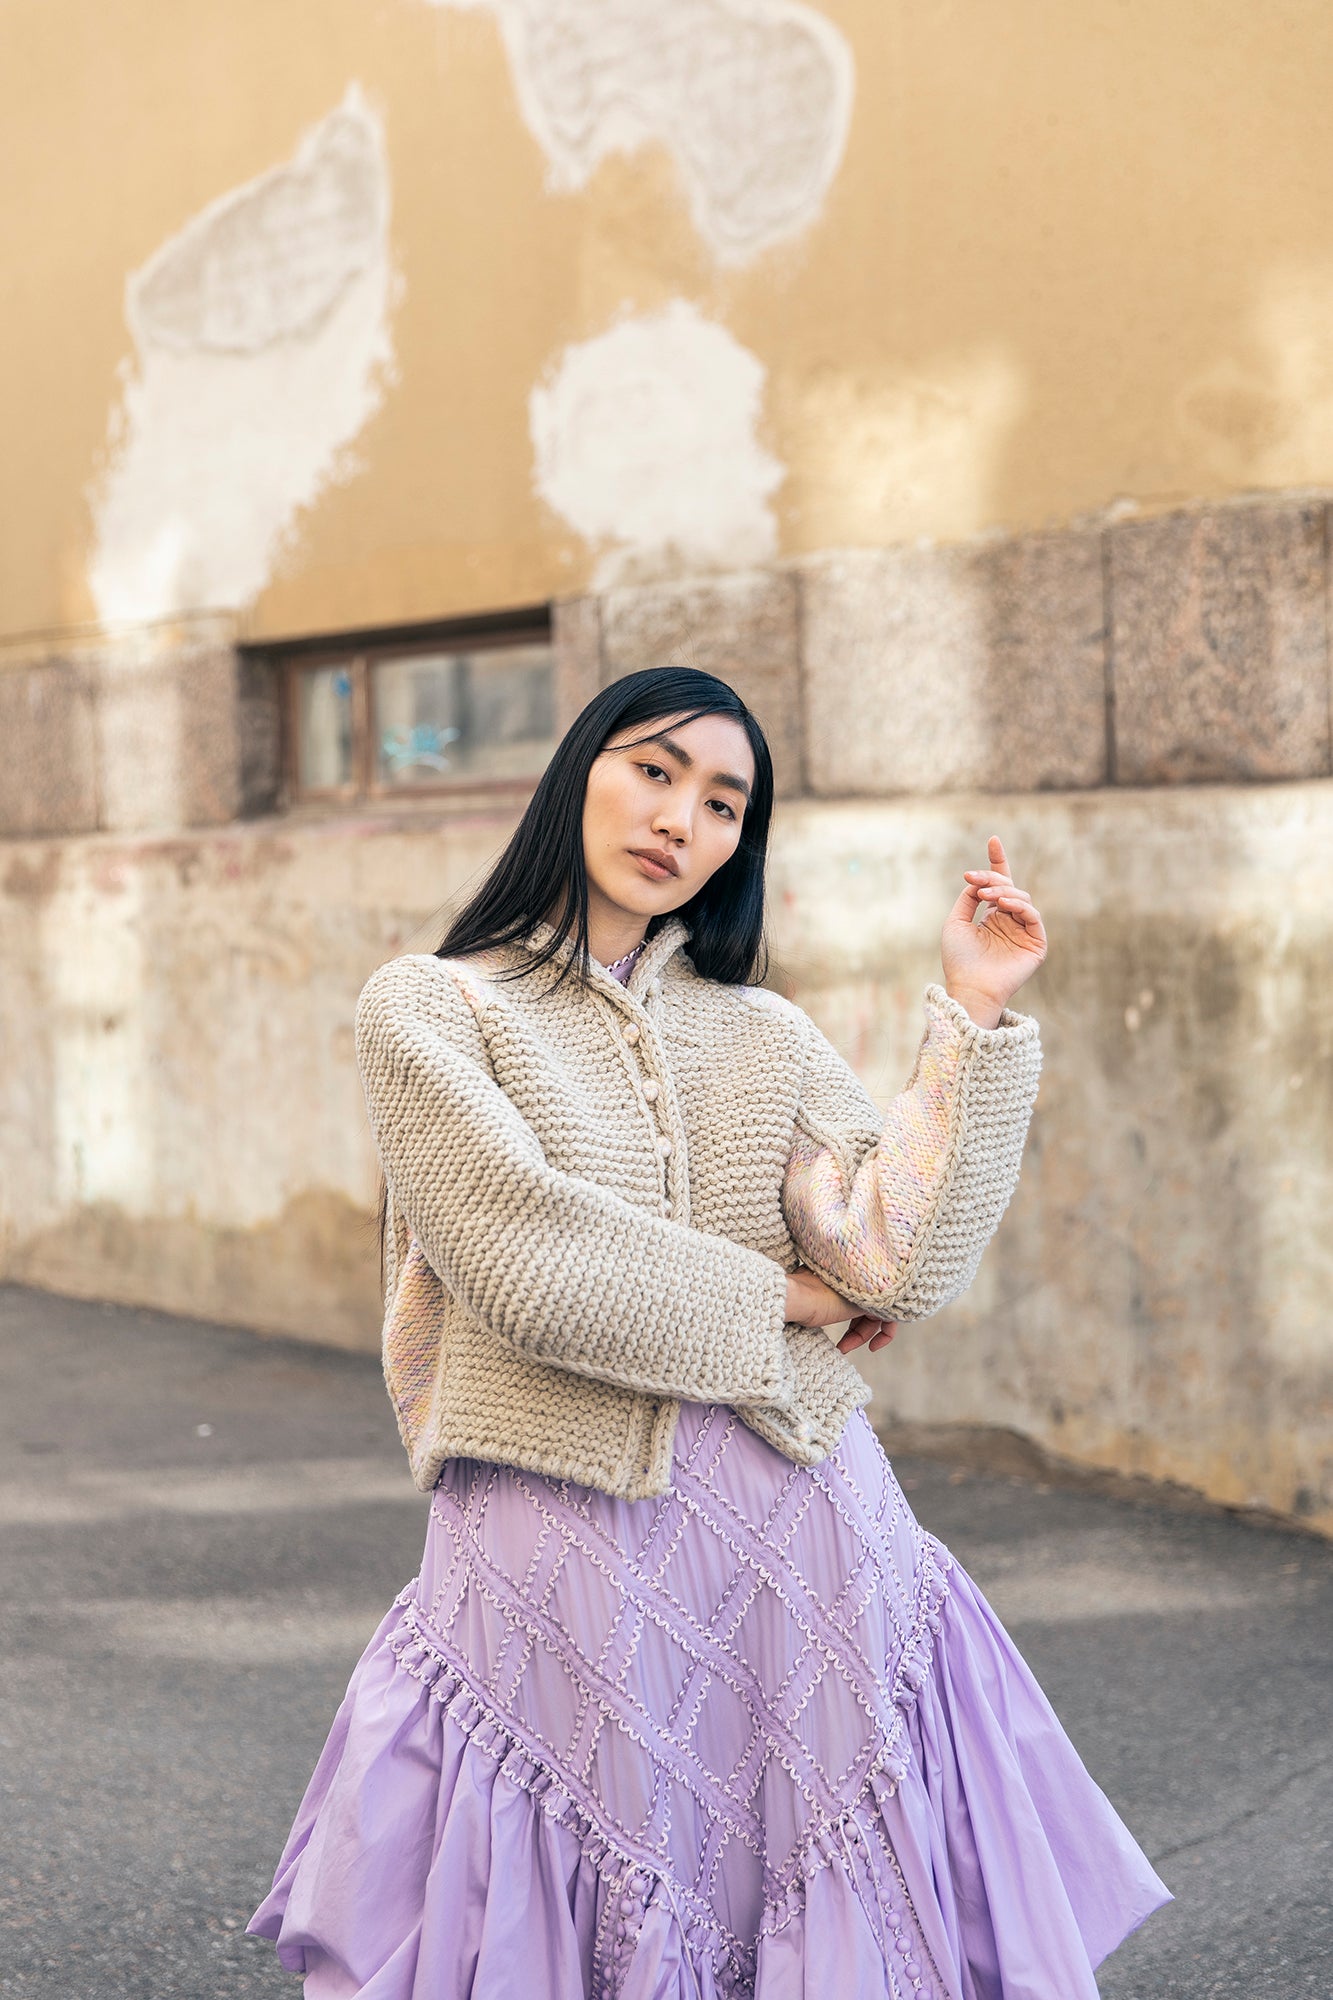 Neons & Neutrals: A Knitwear Collection Curated by Aimée Gille (Aimée Gille)